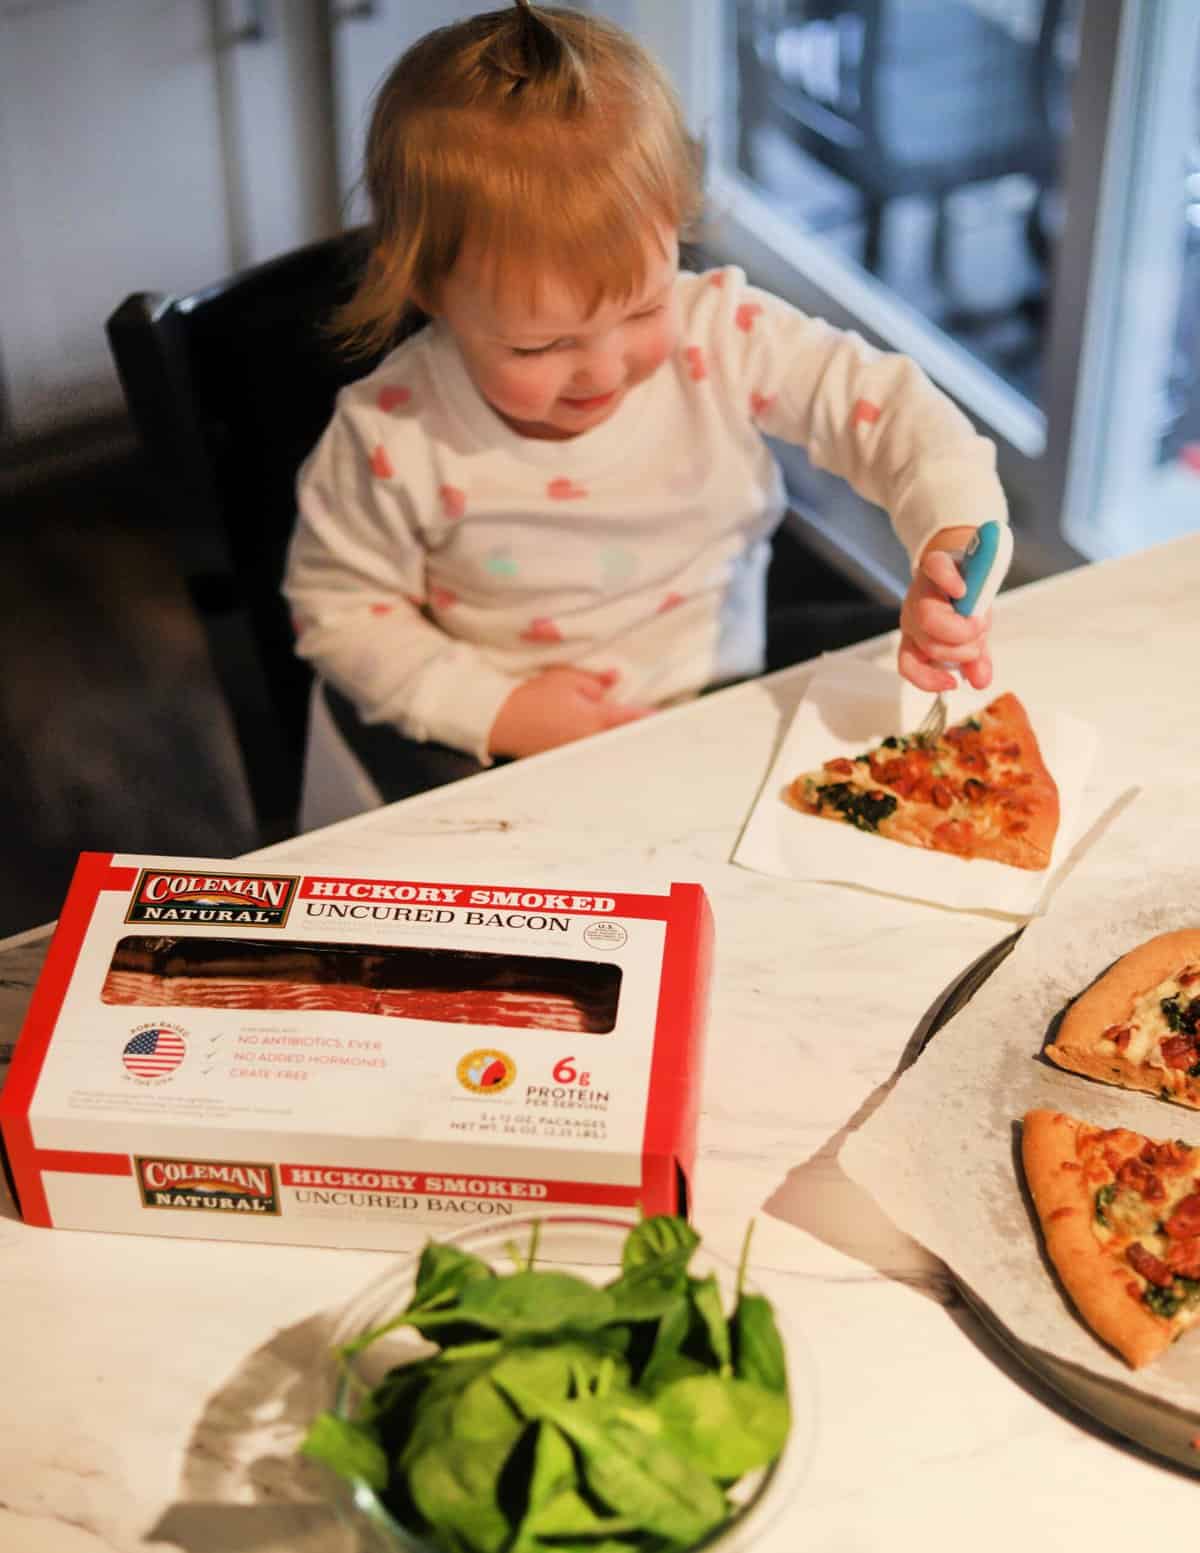 A side shot of a toddler eating pizza.